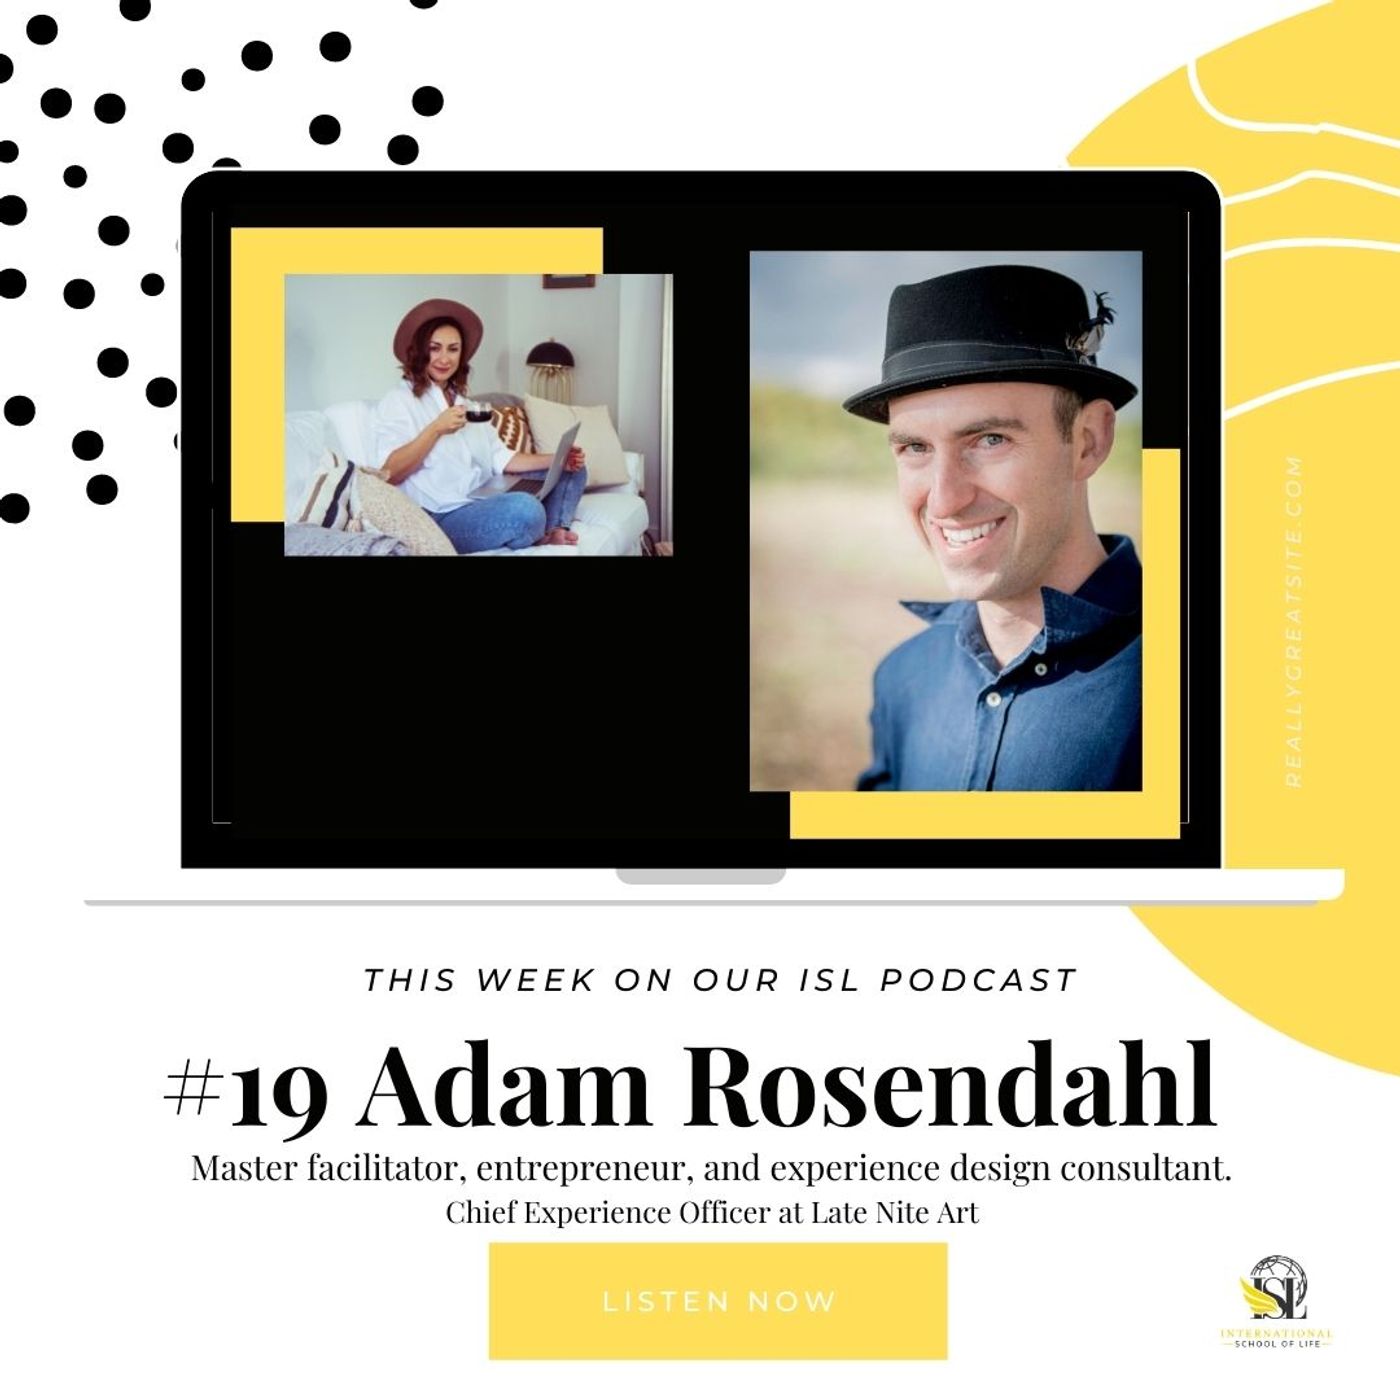 #19 Interview with Adam Rosendahl - Master facilitator, entrepreneur, experience design consultant. Chief Experience Officer at Late Nite